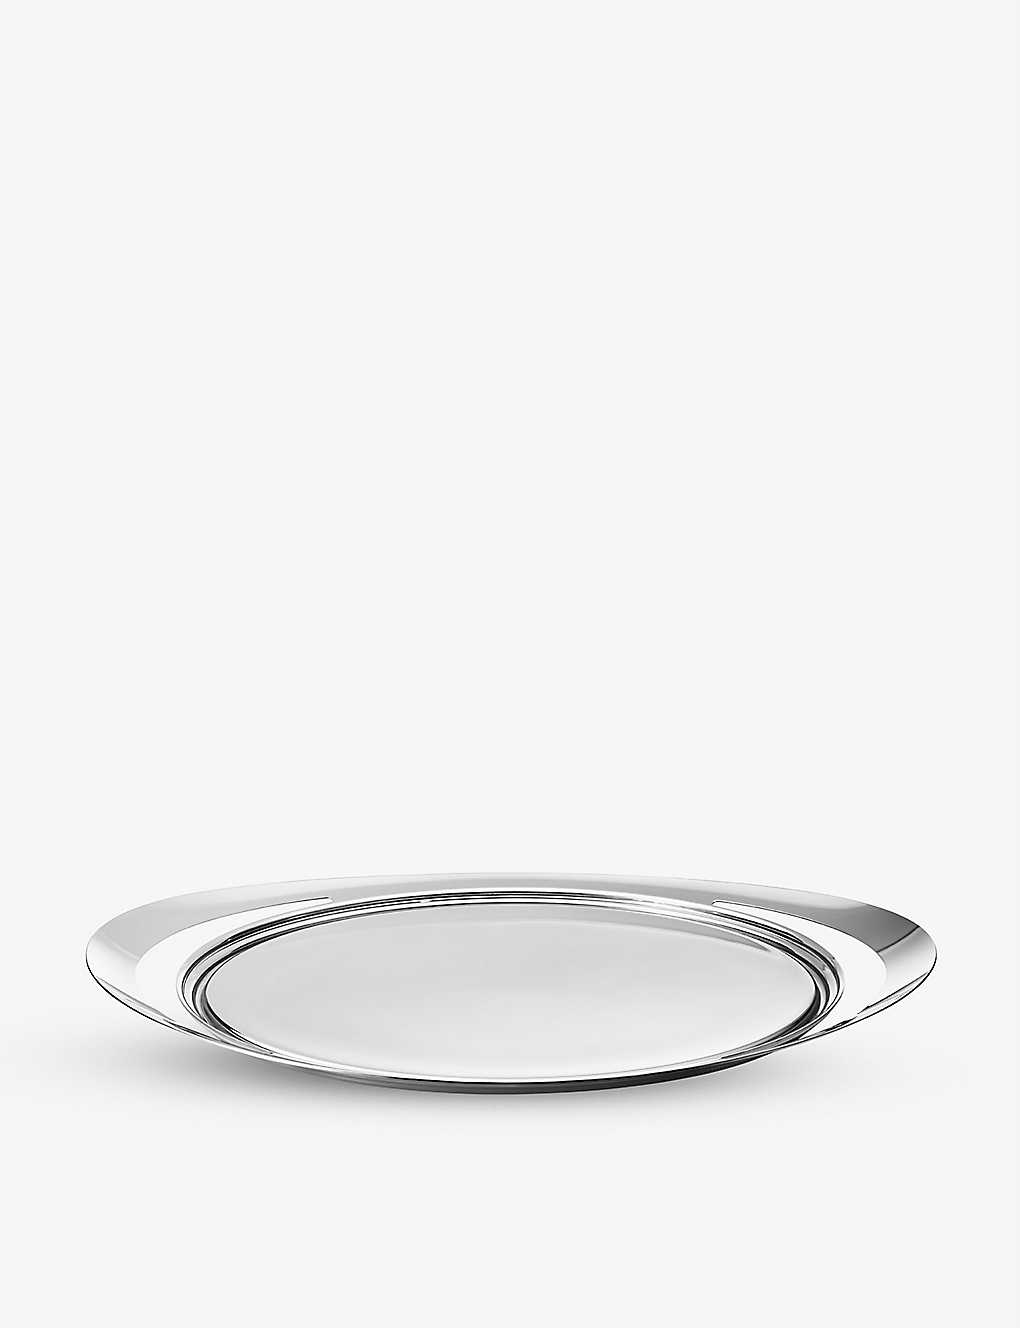 GEORG JENSEN ֥ ݥå ƥ쥹 ӥ ȥ졼 48cm x 36cm Cobra polished stainless-steel serving tray 48cm x 36cm